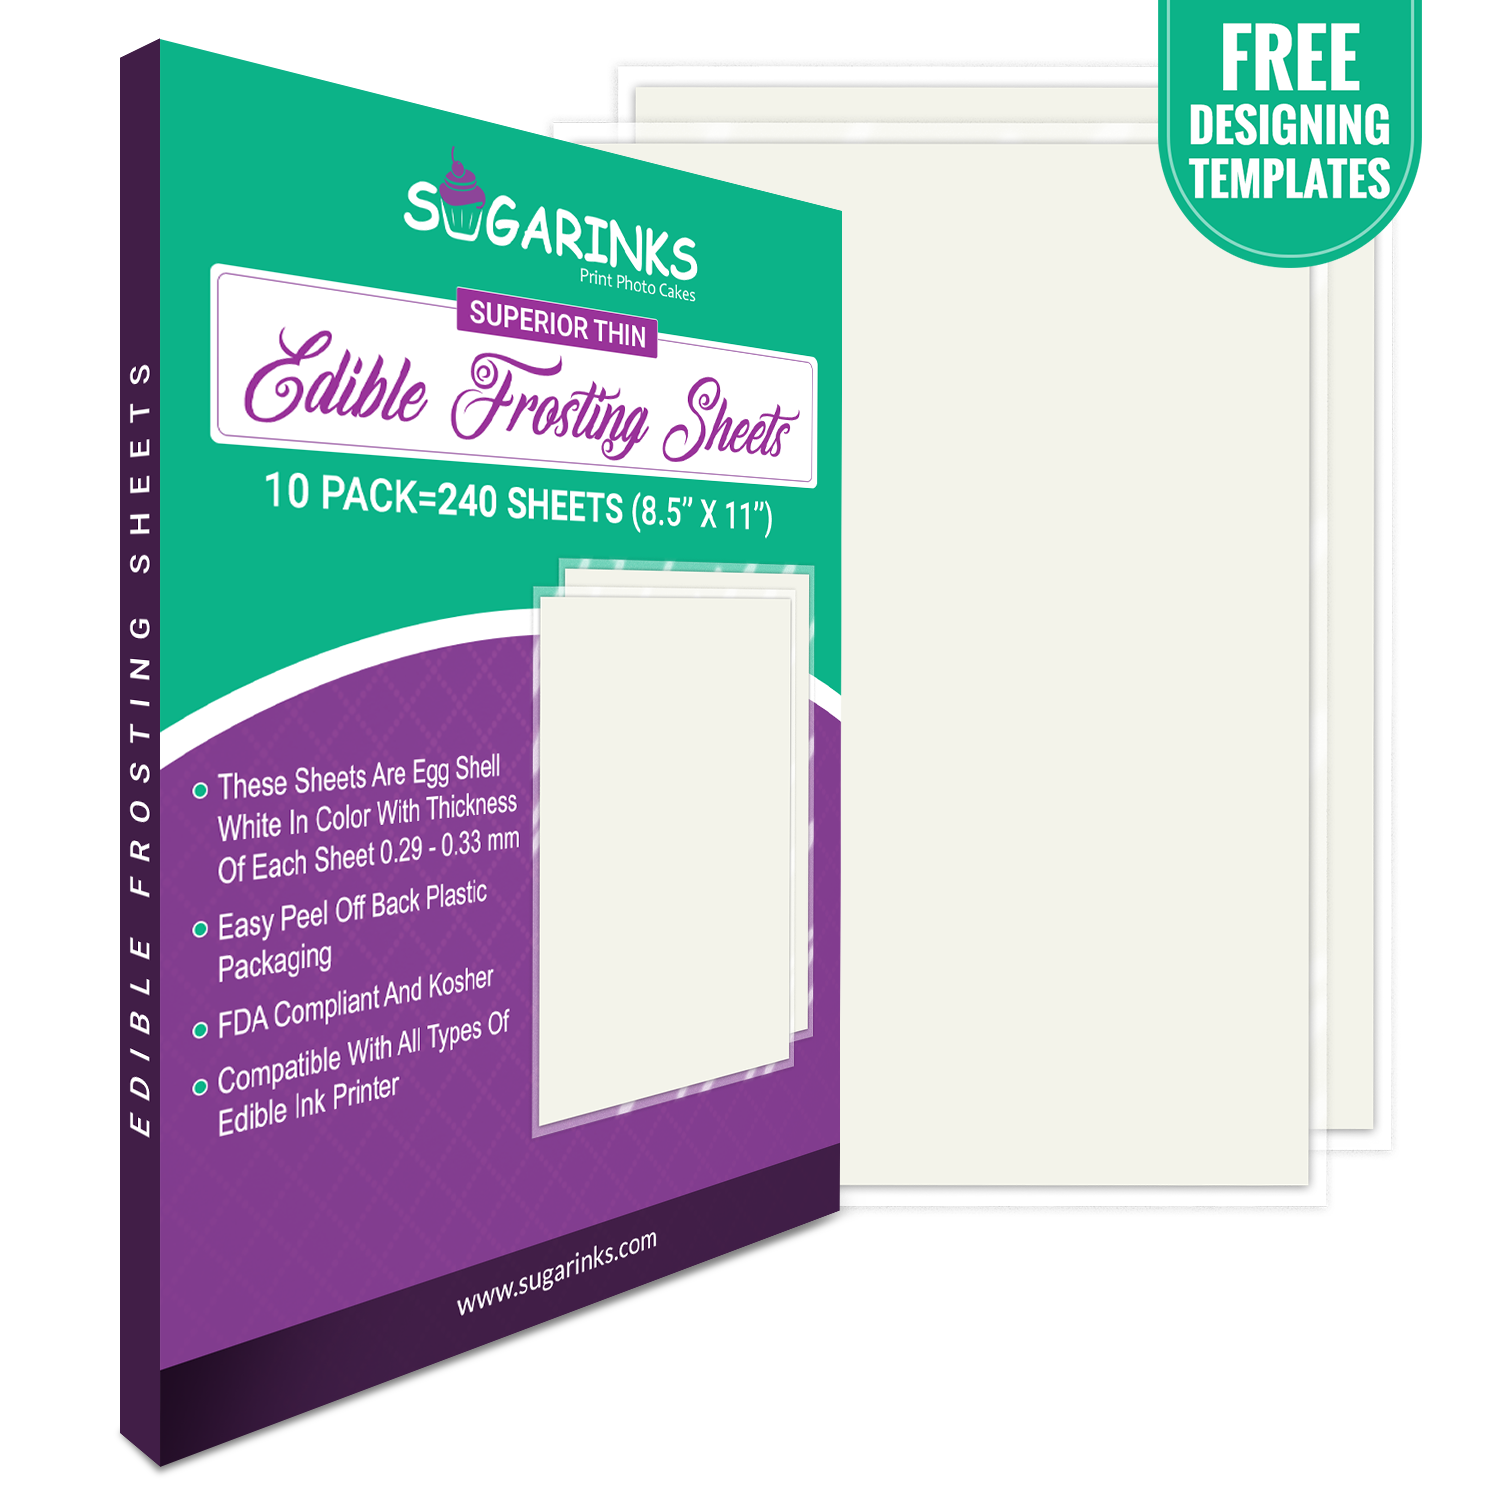 Sugarinks Premium Quality Superior Thin Frosting Sheets A4 Size (8.5”X11”) Pack of 10 – 240 Sheets